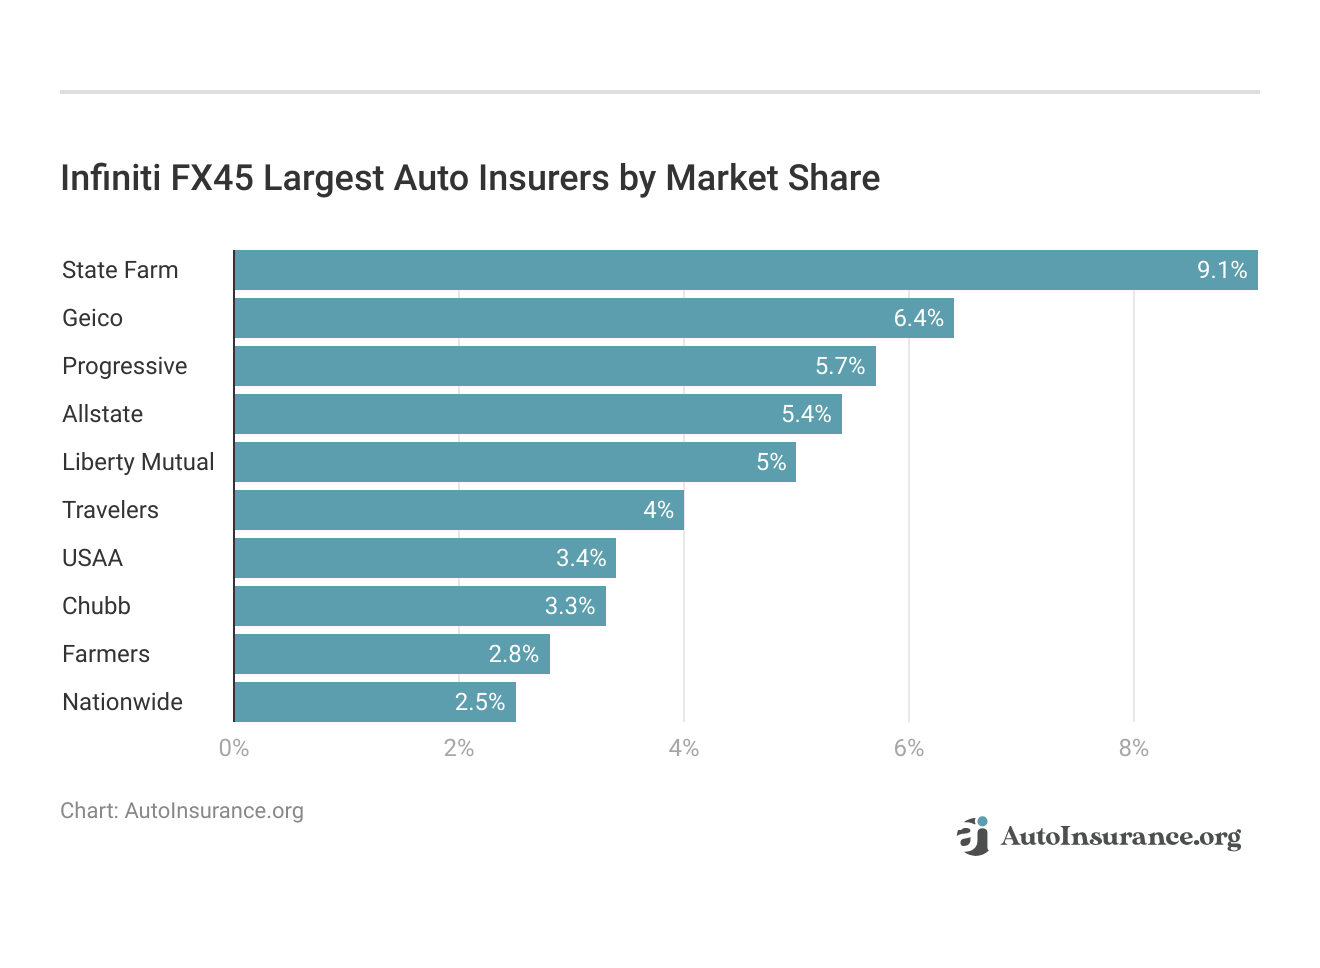 <h3>Infiniti FX45 Largest Auto Insurers by Market Share</h3> 